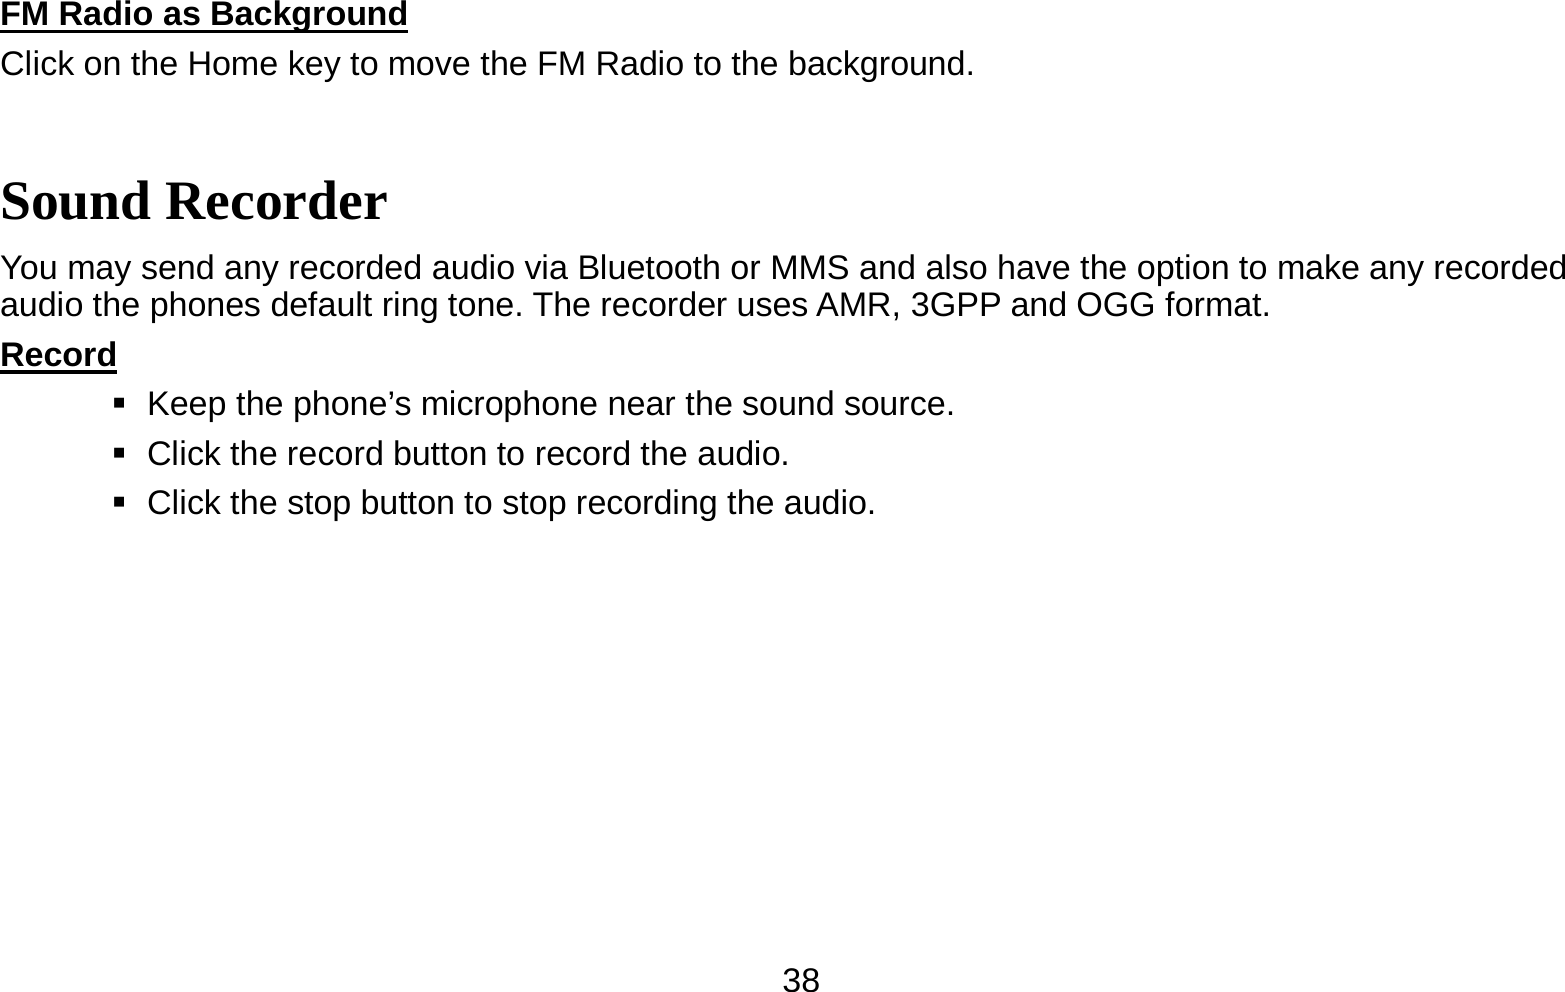   38FM Radio as Background                                                                          Click on the Home key to move the FM Radio to the background. Sound Recorder You may send any recorded audio via Bluetooth or MMS and also have the option to make any recorded audio the phones default ring tone. The recorder uses AMR, 3GPP and OGG format. Record                                                                                               Keep the phone’s microphone near the sound source.    Click the record button to record the audio.    Click the stop button to stop recording the audio. 